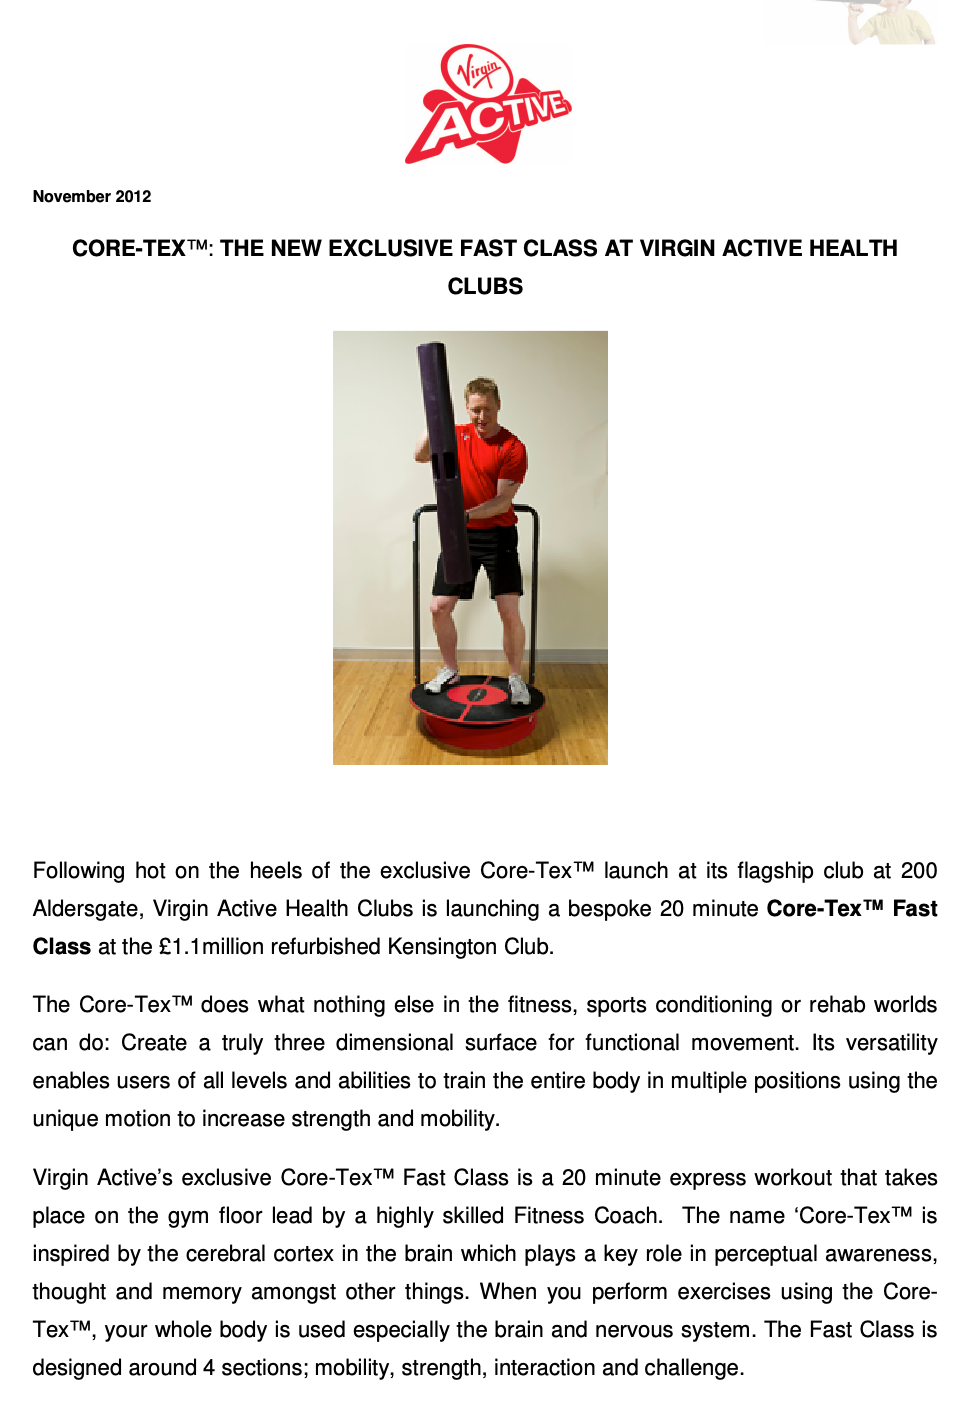 VIRGIN ACTIVE HEALTH CLUBS PRESS RELEASE, NOVEMEBER 2012: CORE-TEX : The New Exclusive Fast Class at Virgin Active Health Clubs